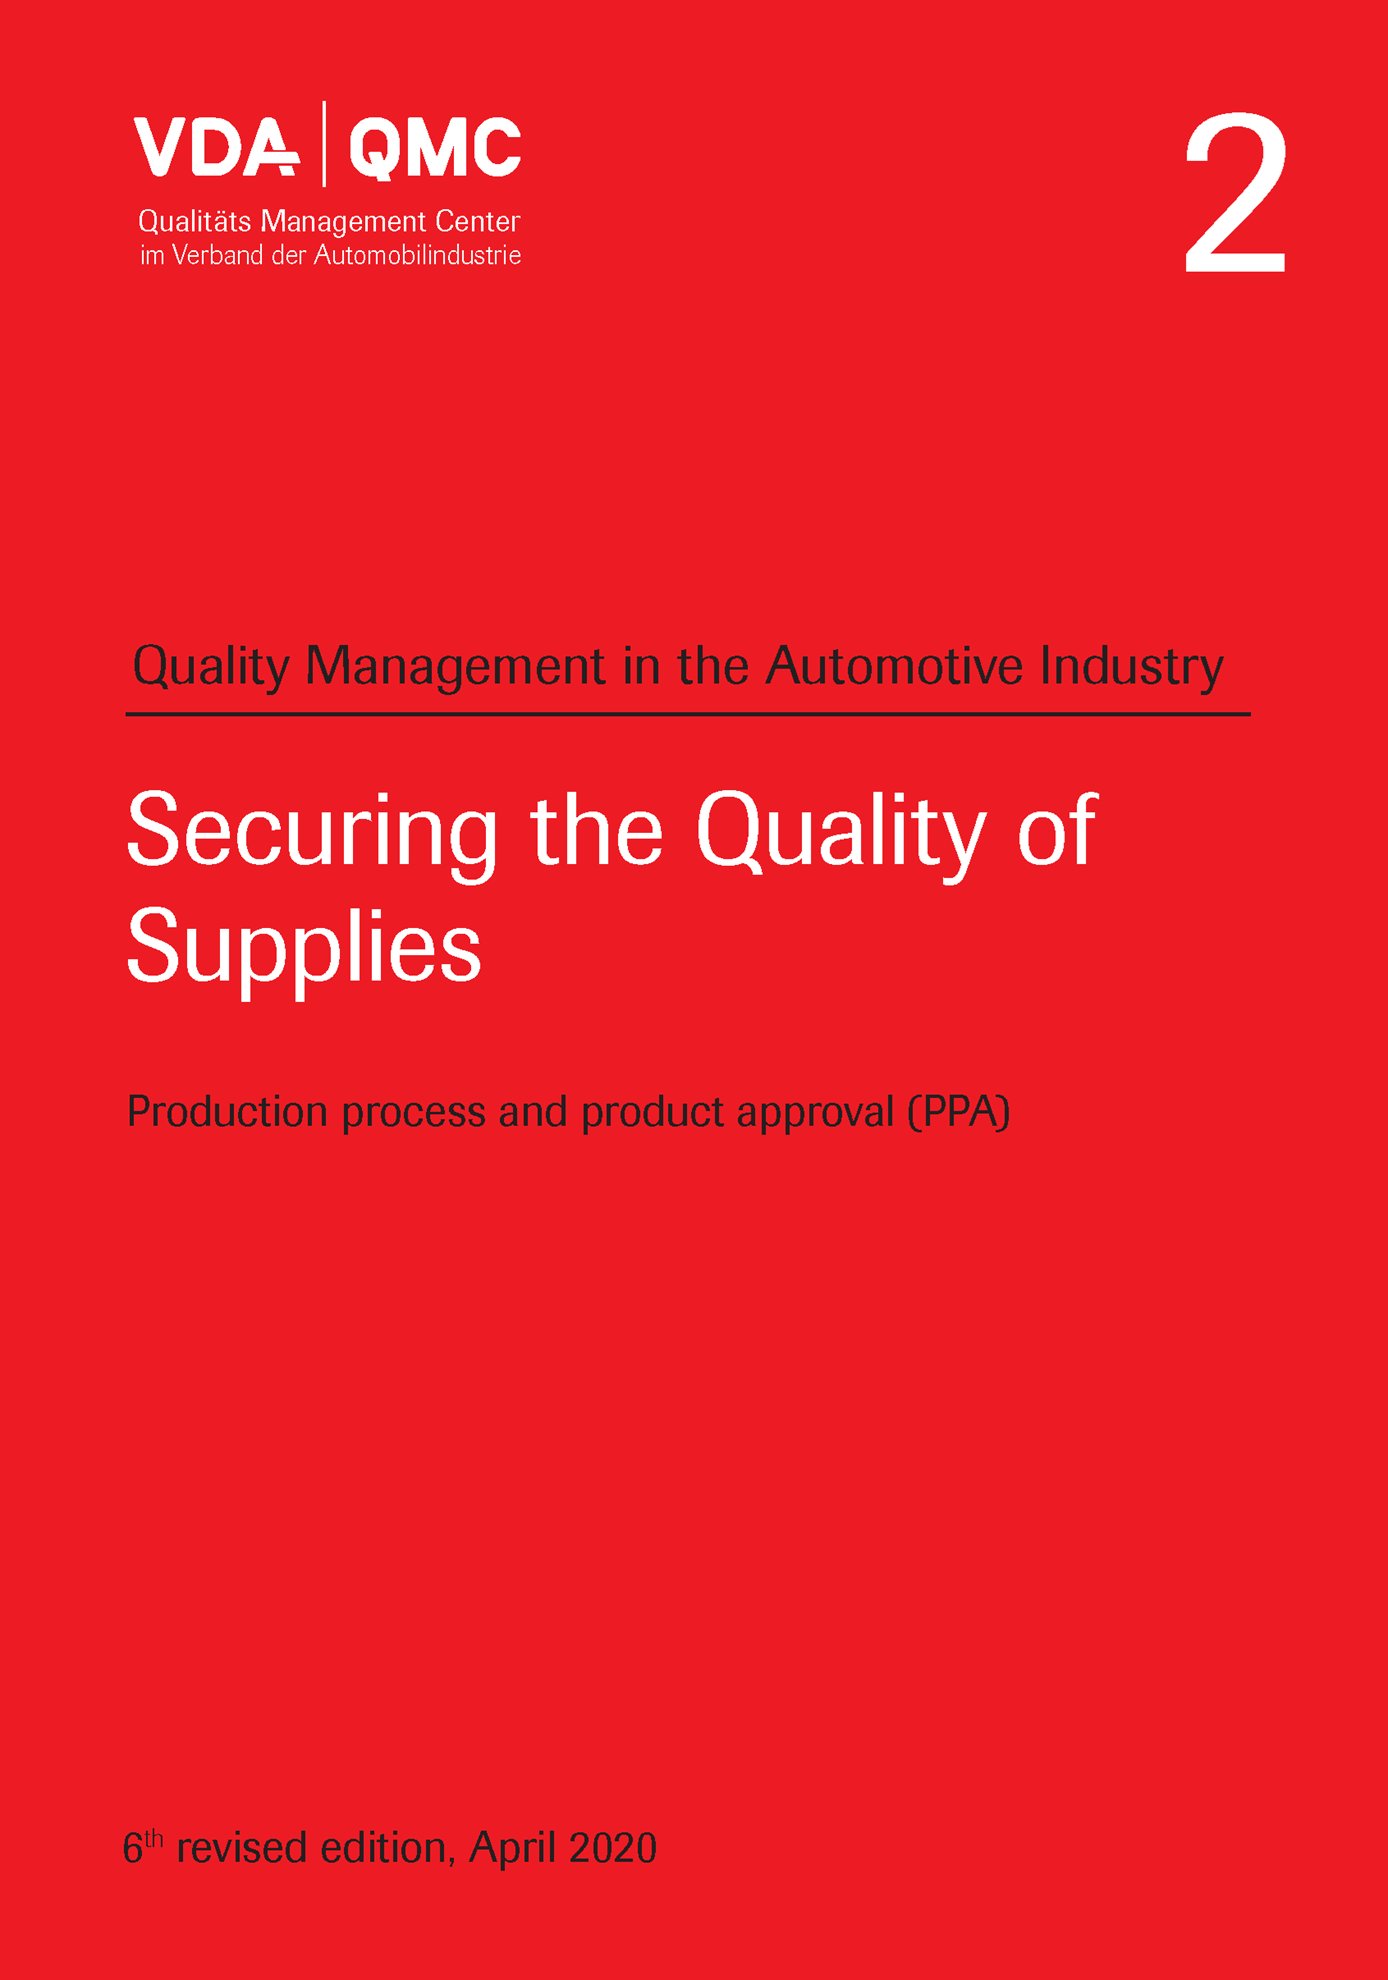 Náhľad  VDA Volume 2, Securing the Quality of Supplies Production process and product approval (PPA)
 6th, revised edition, April 2020 1.4.2020